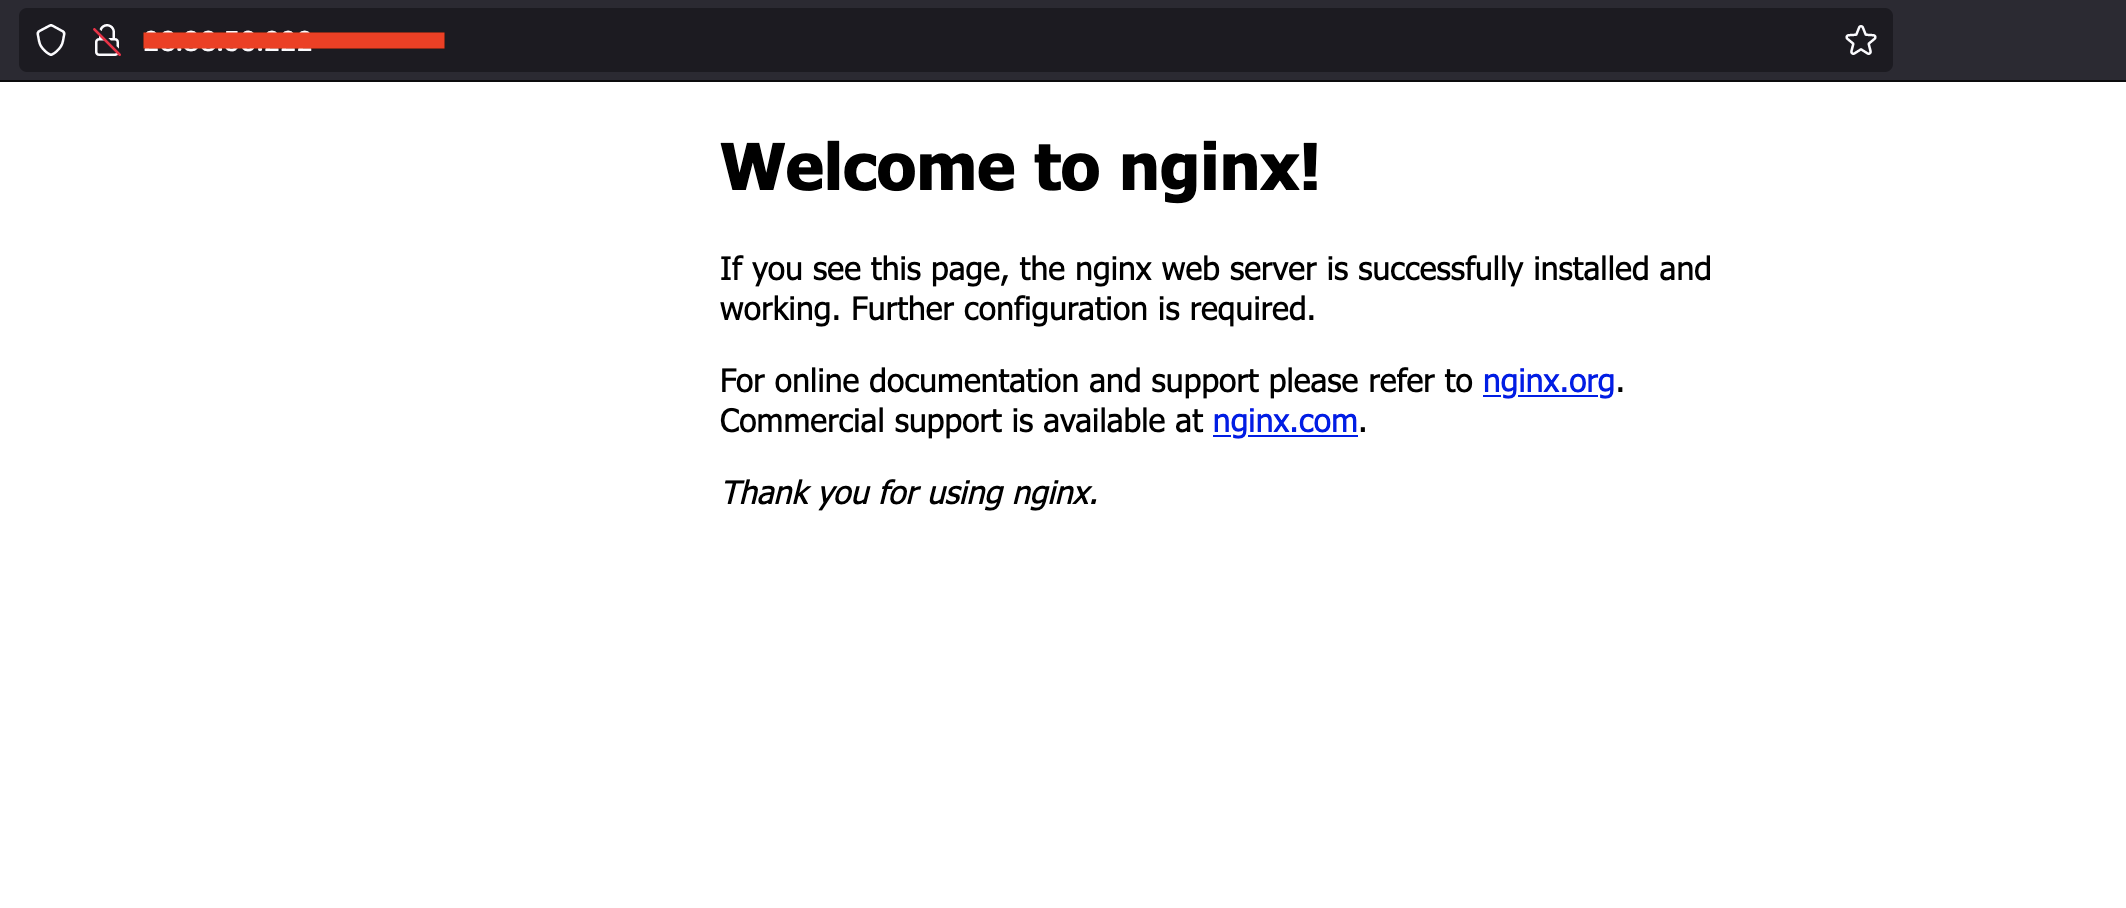 Nginx welcome page.